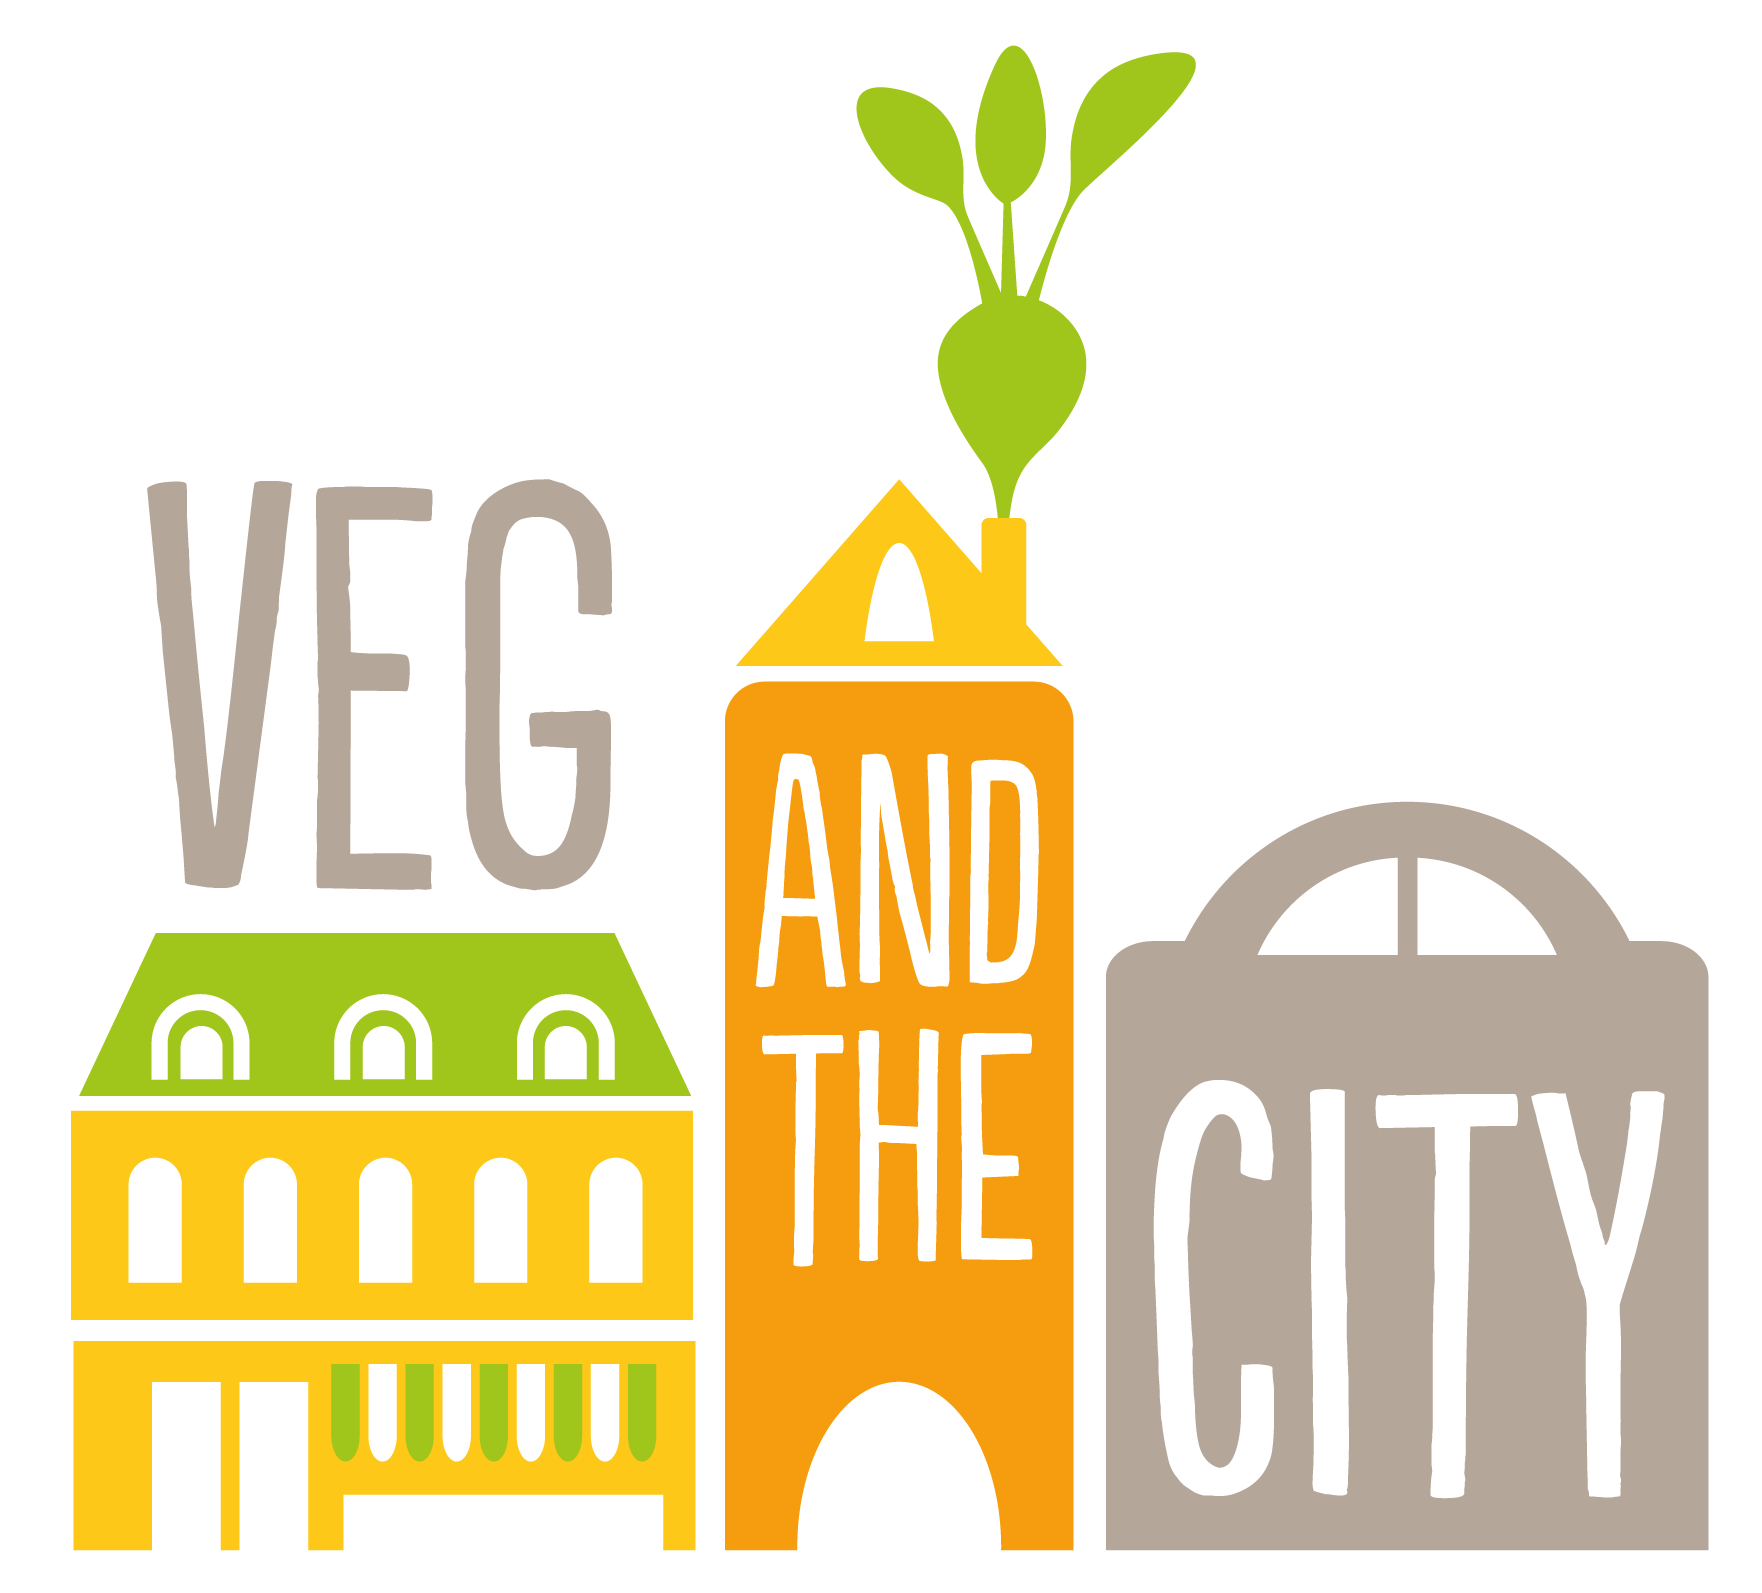 VEG and the City_Logo_sublined.png (0.1 MB)